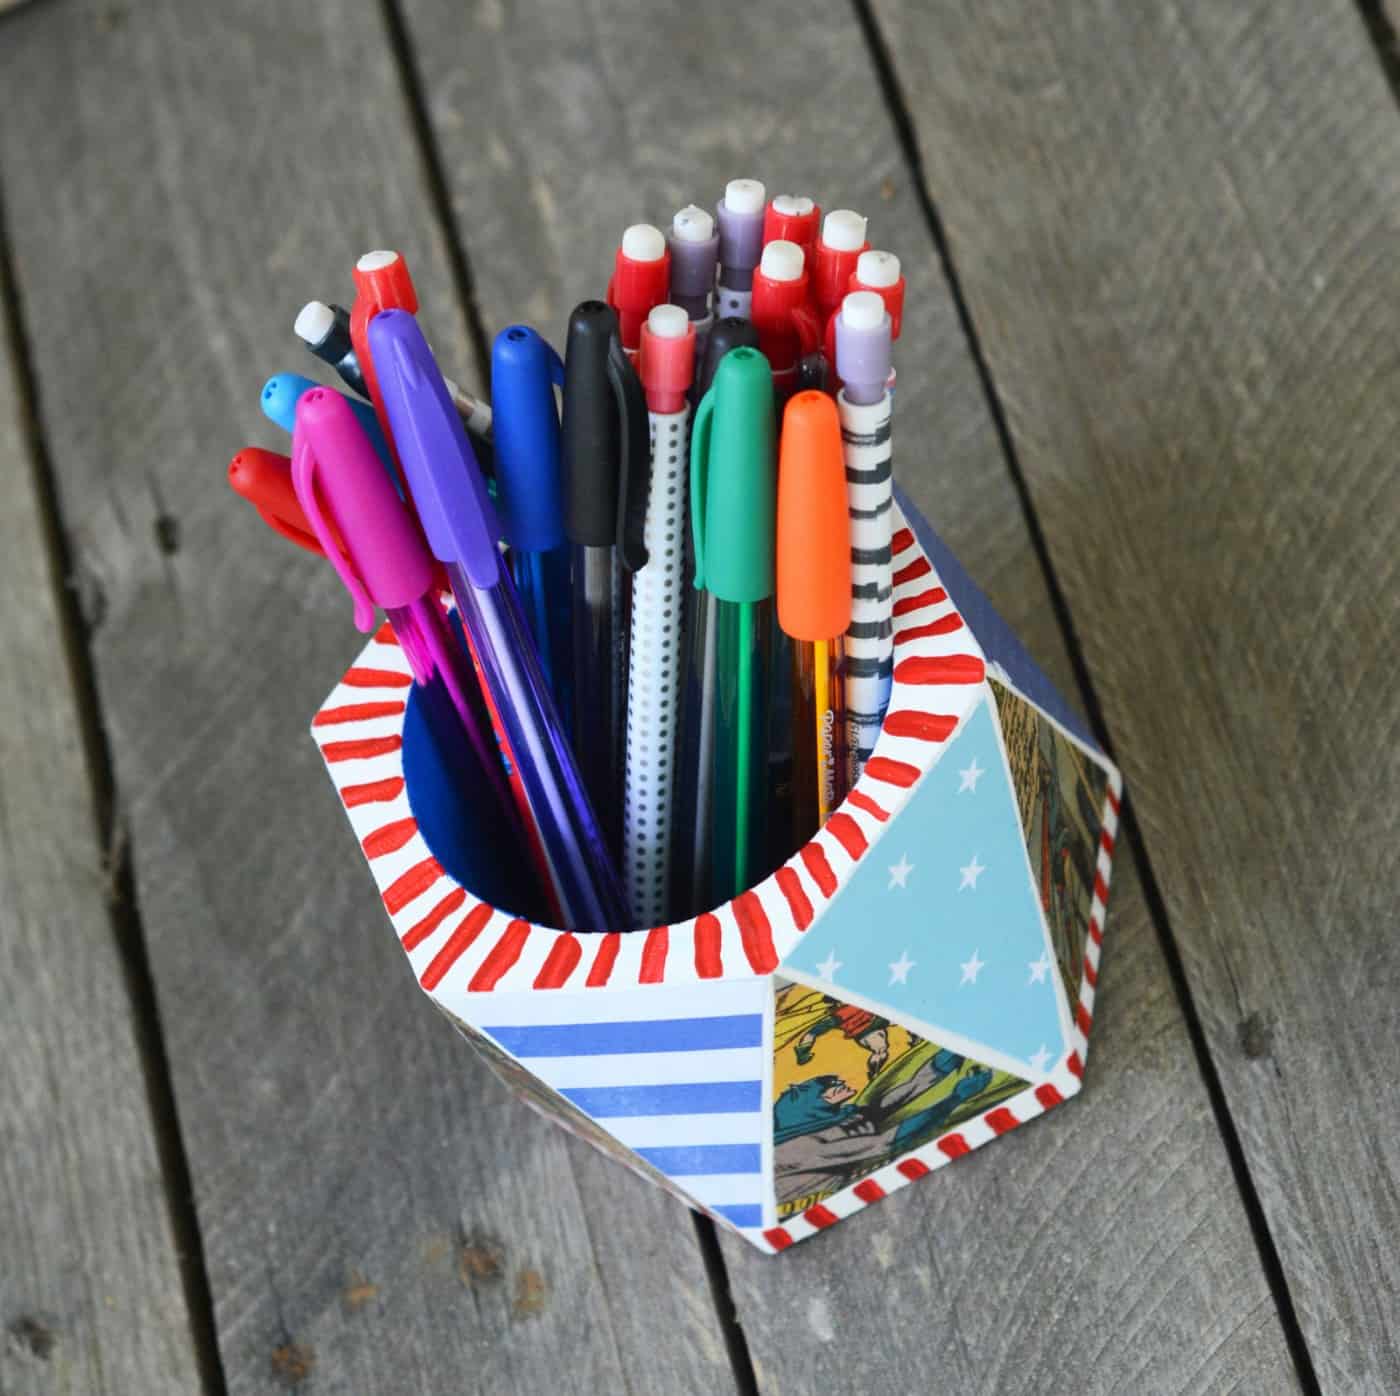 DIY pen and pencil cup with Mod Podge